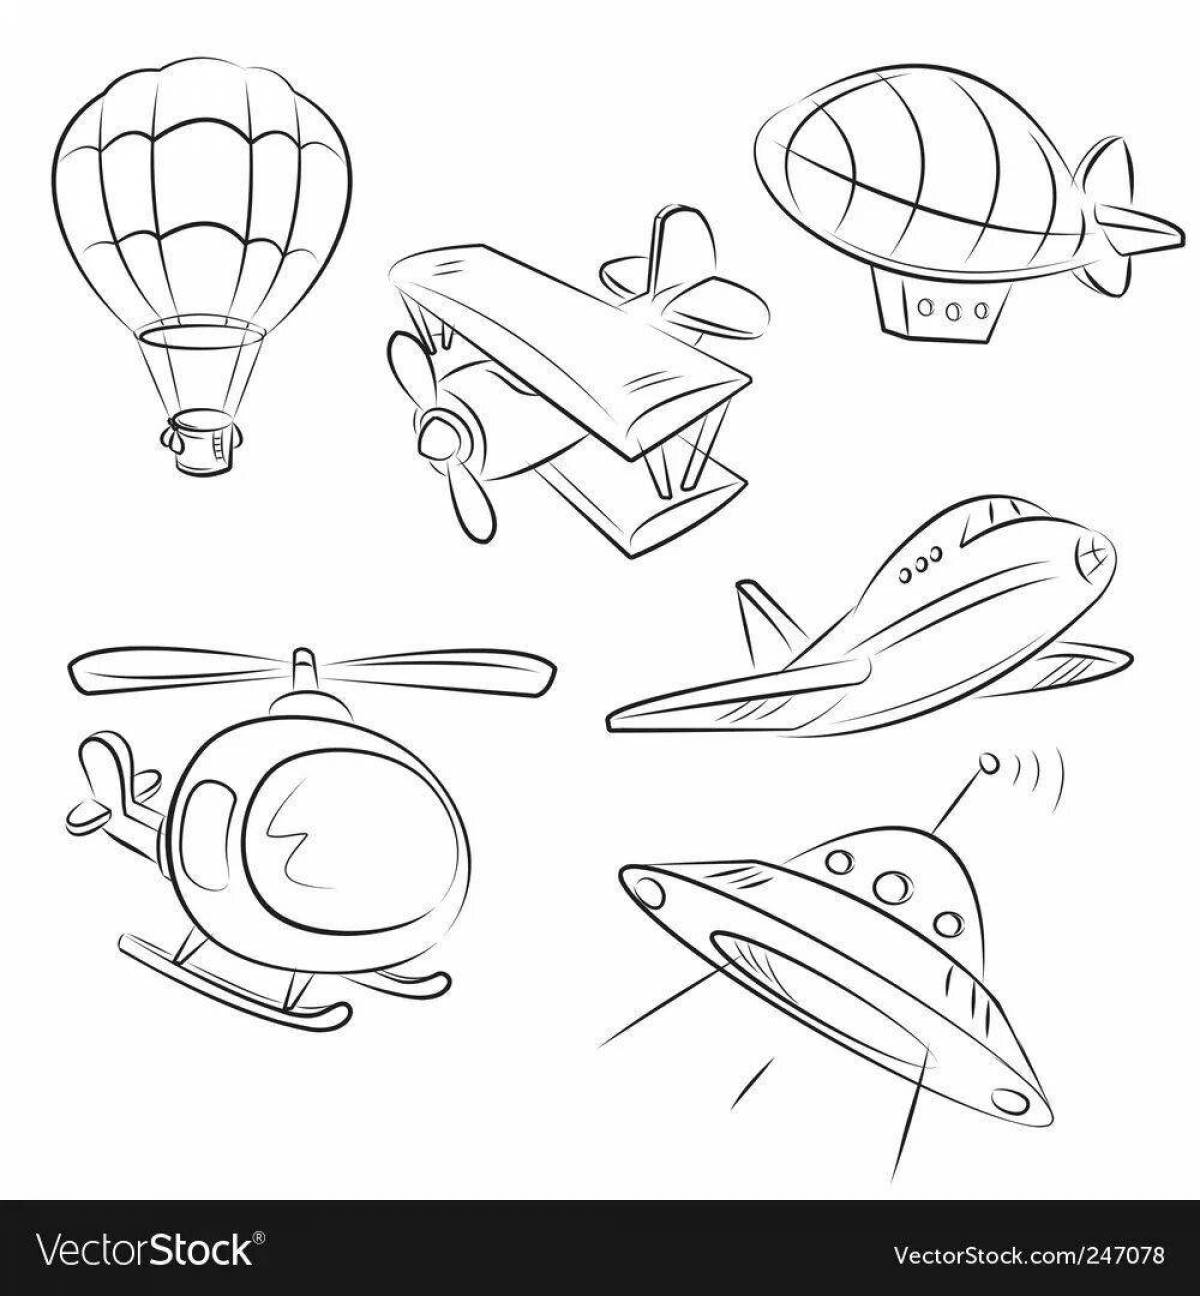 Playful air transport coloring page